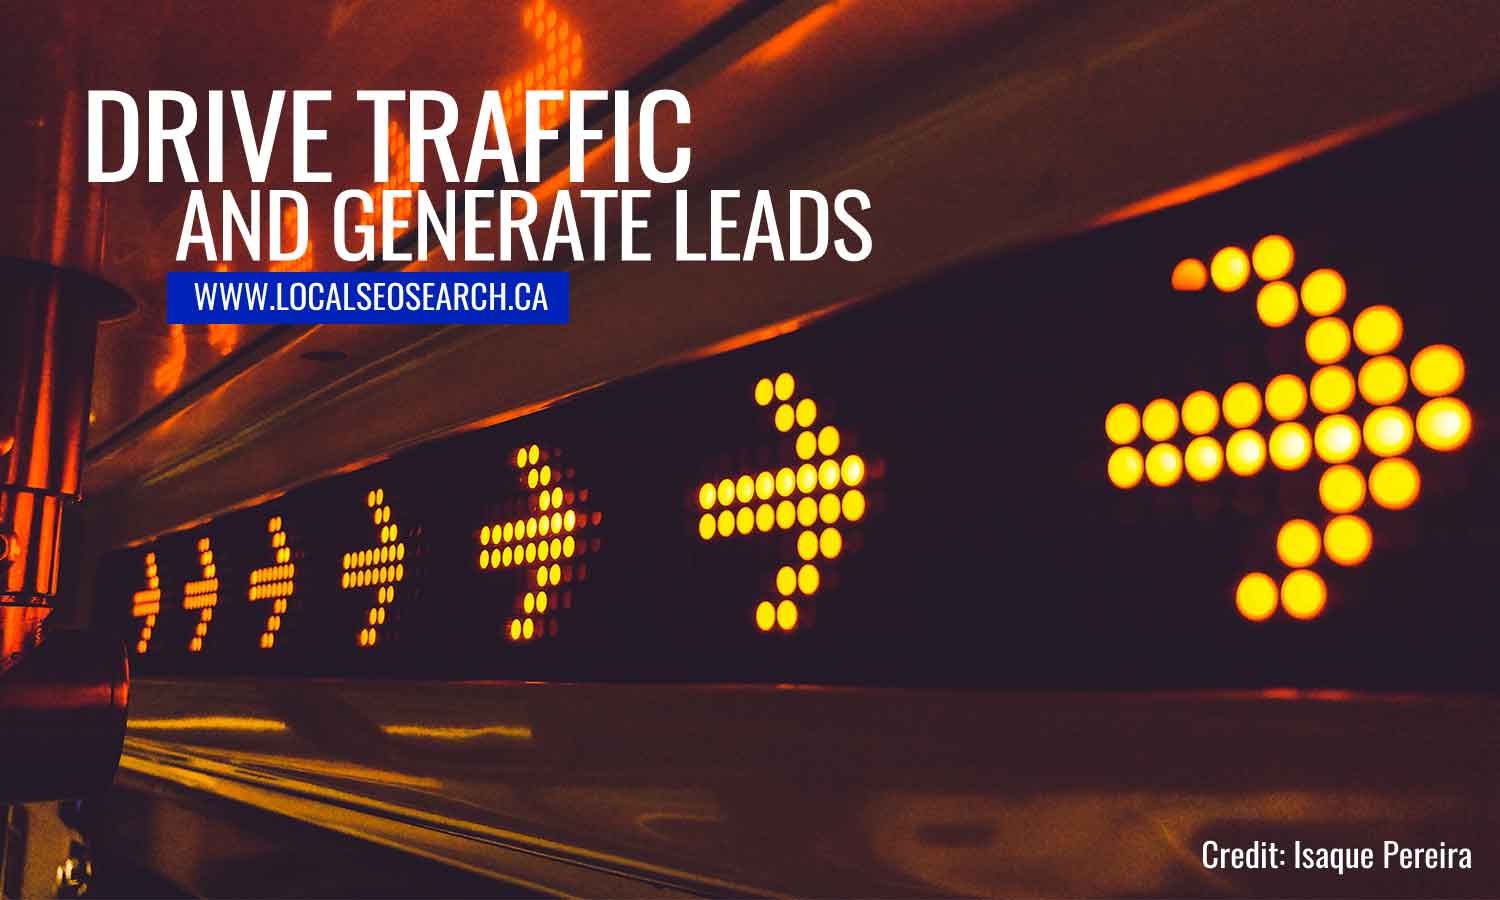 Drive traffic and generate leads